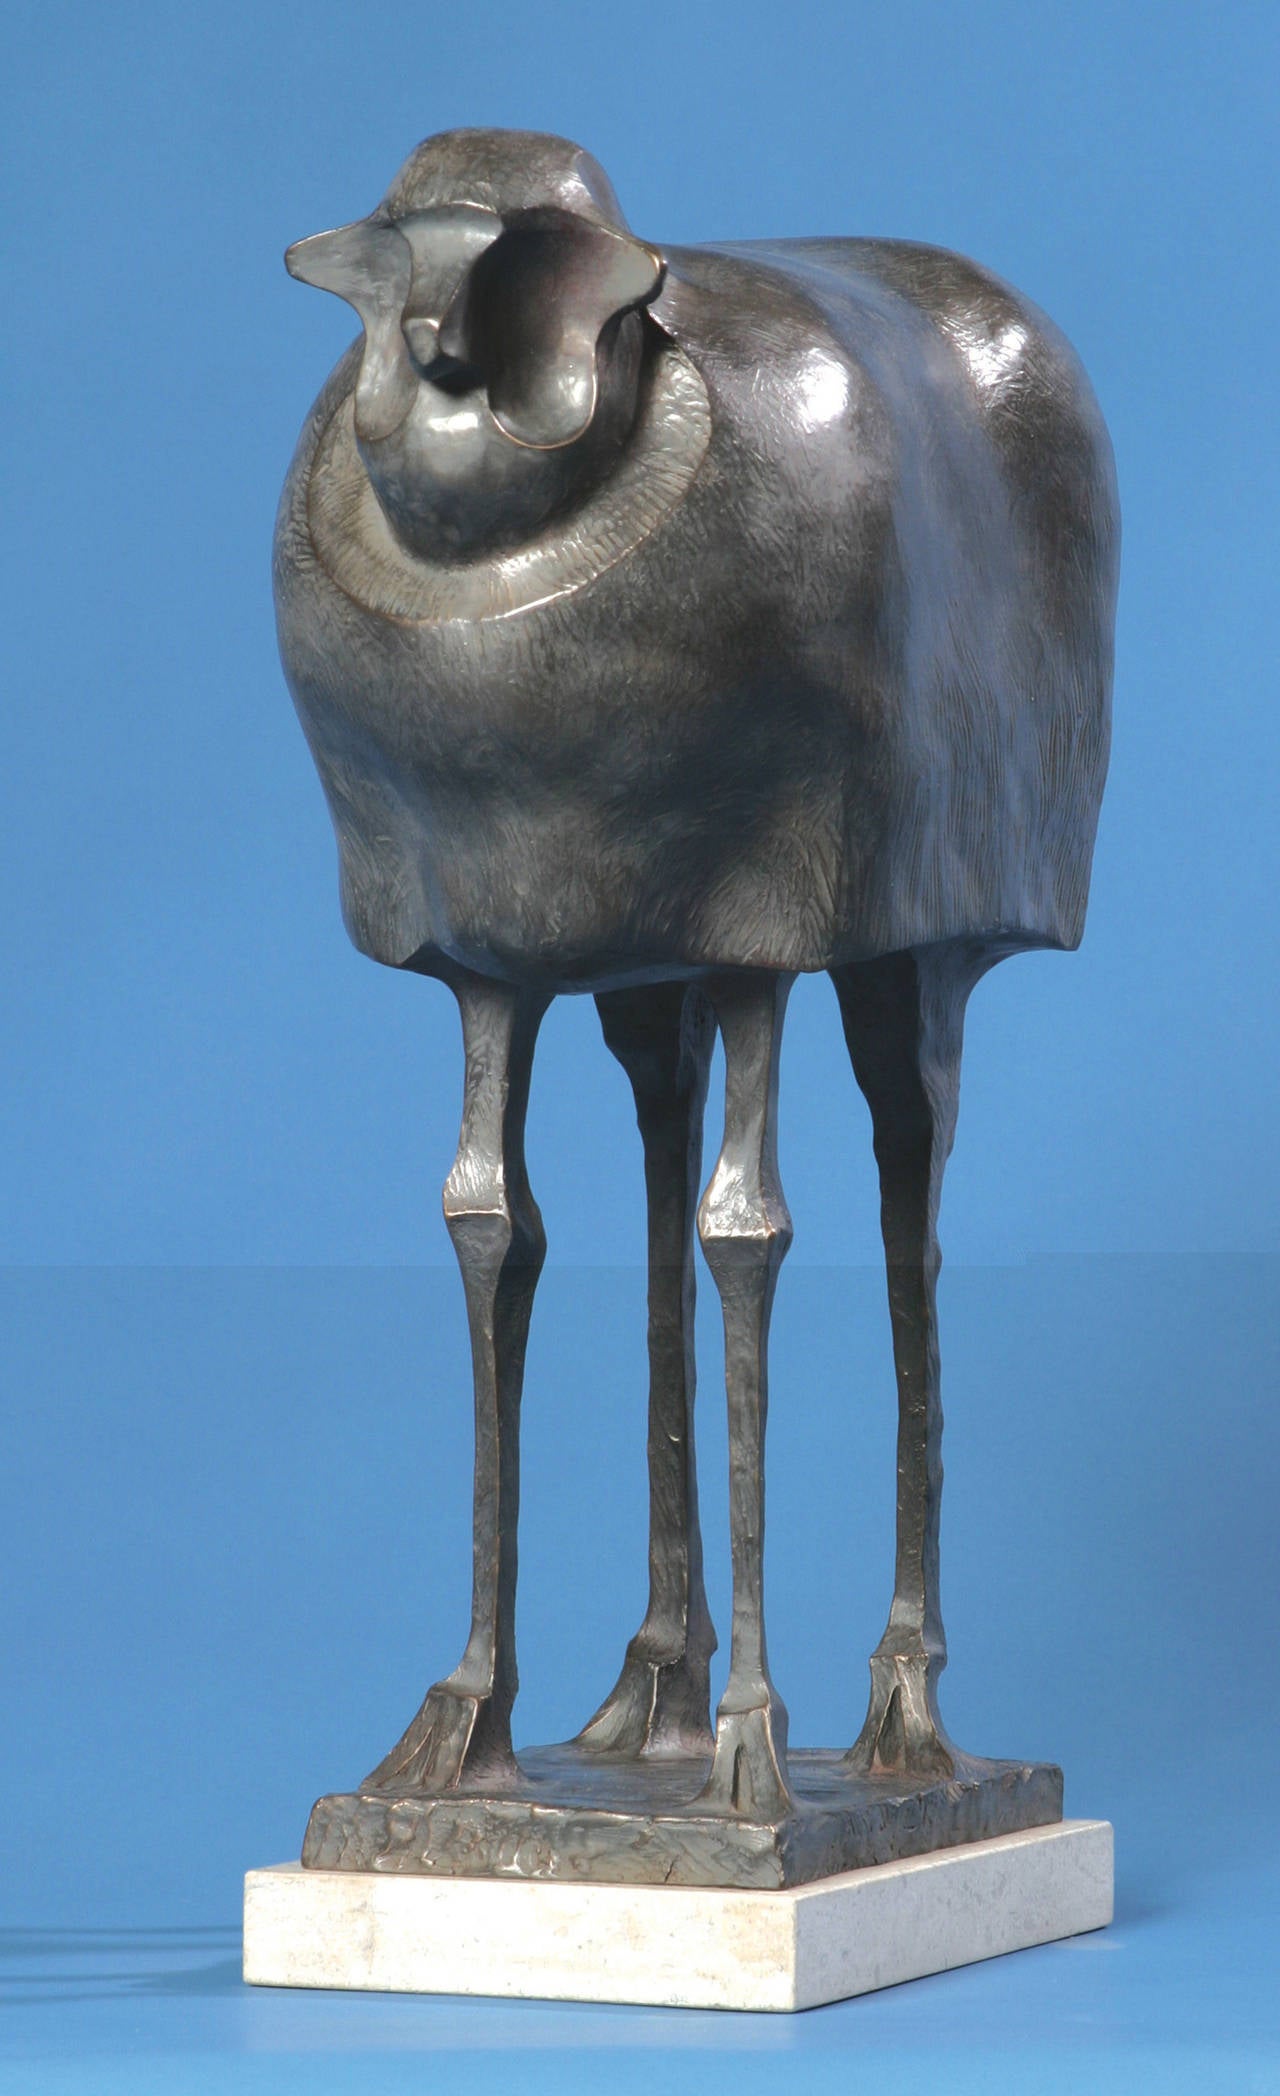 "Three Bags Full" Silver-colored bronze depiction of a sheep. 